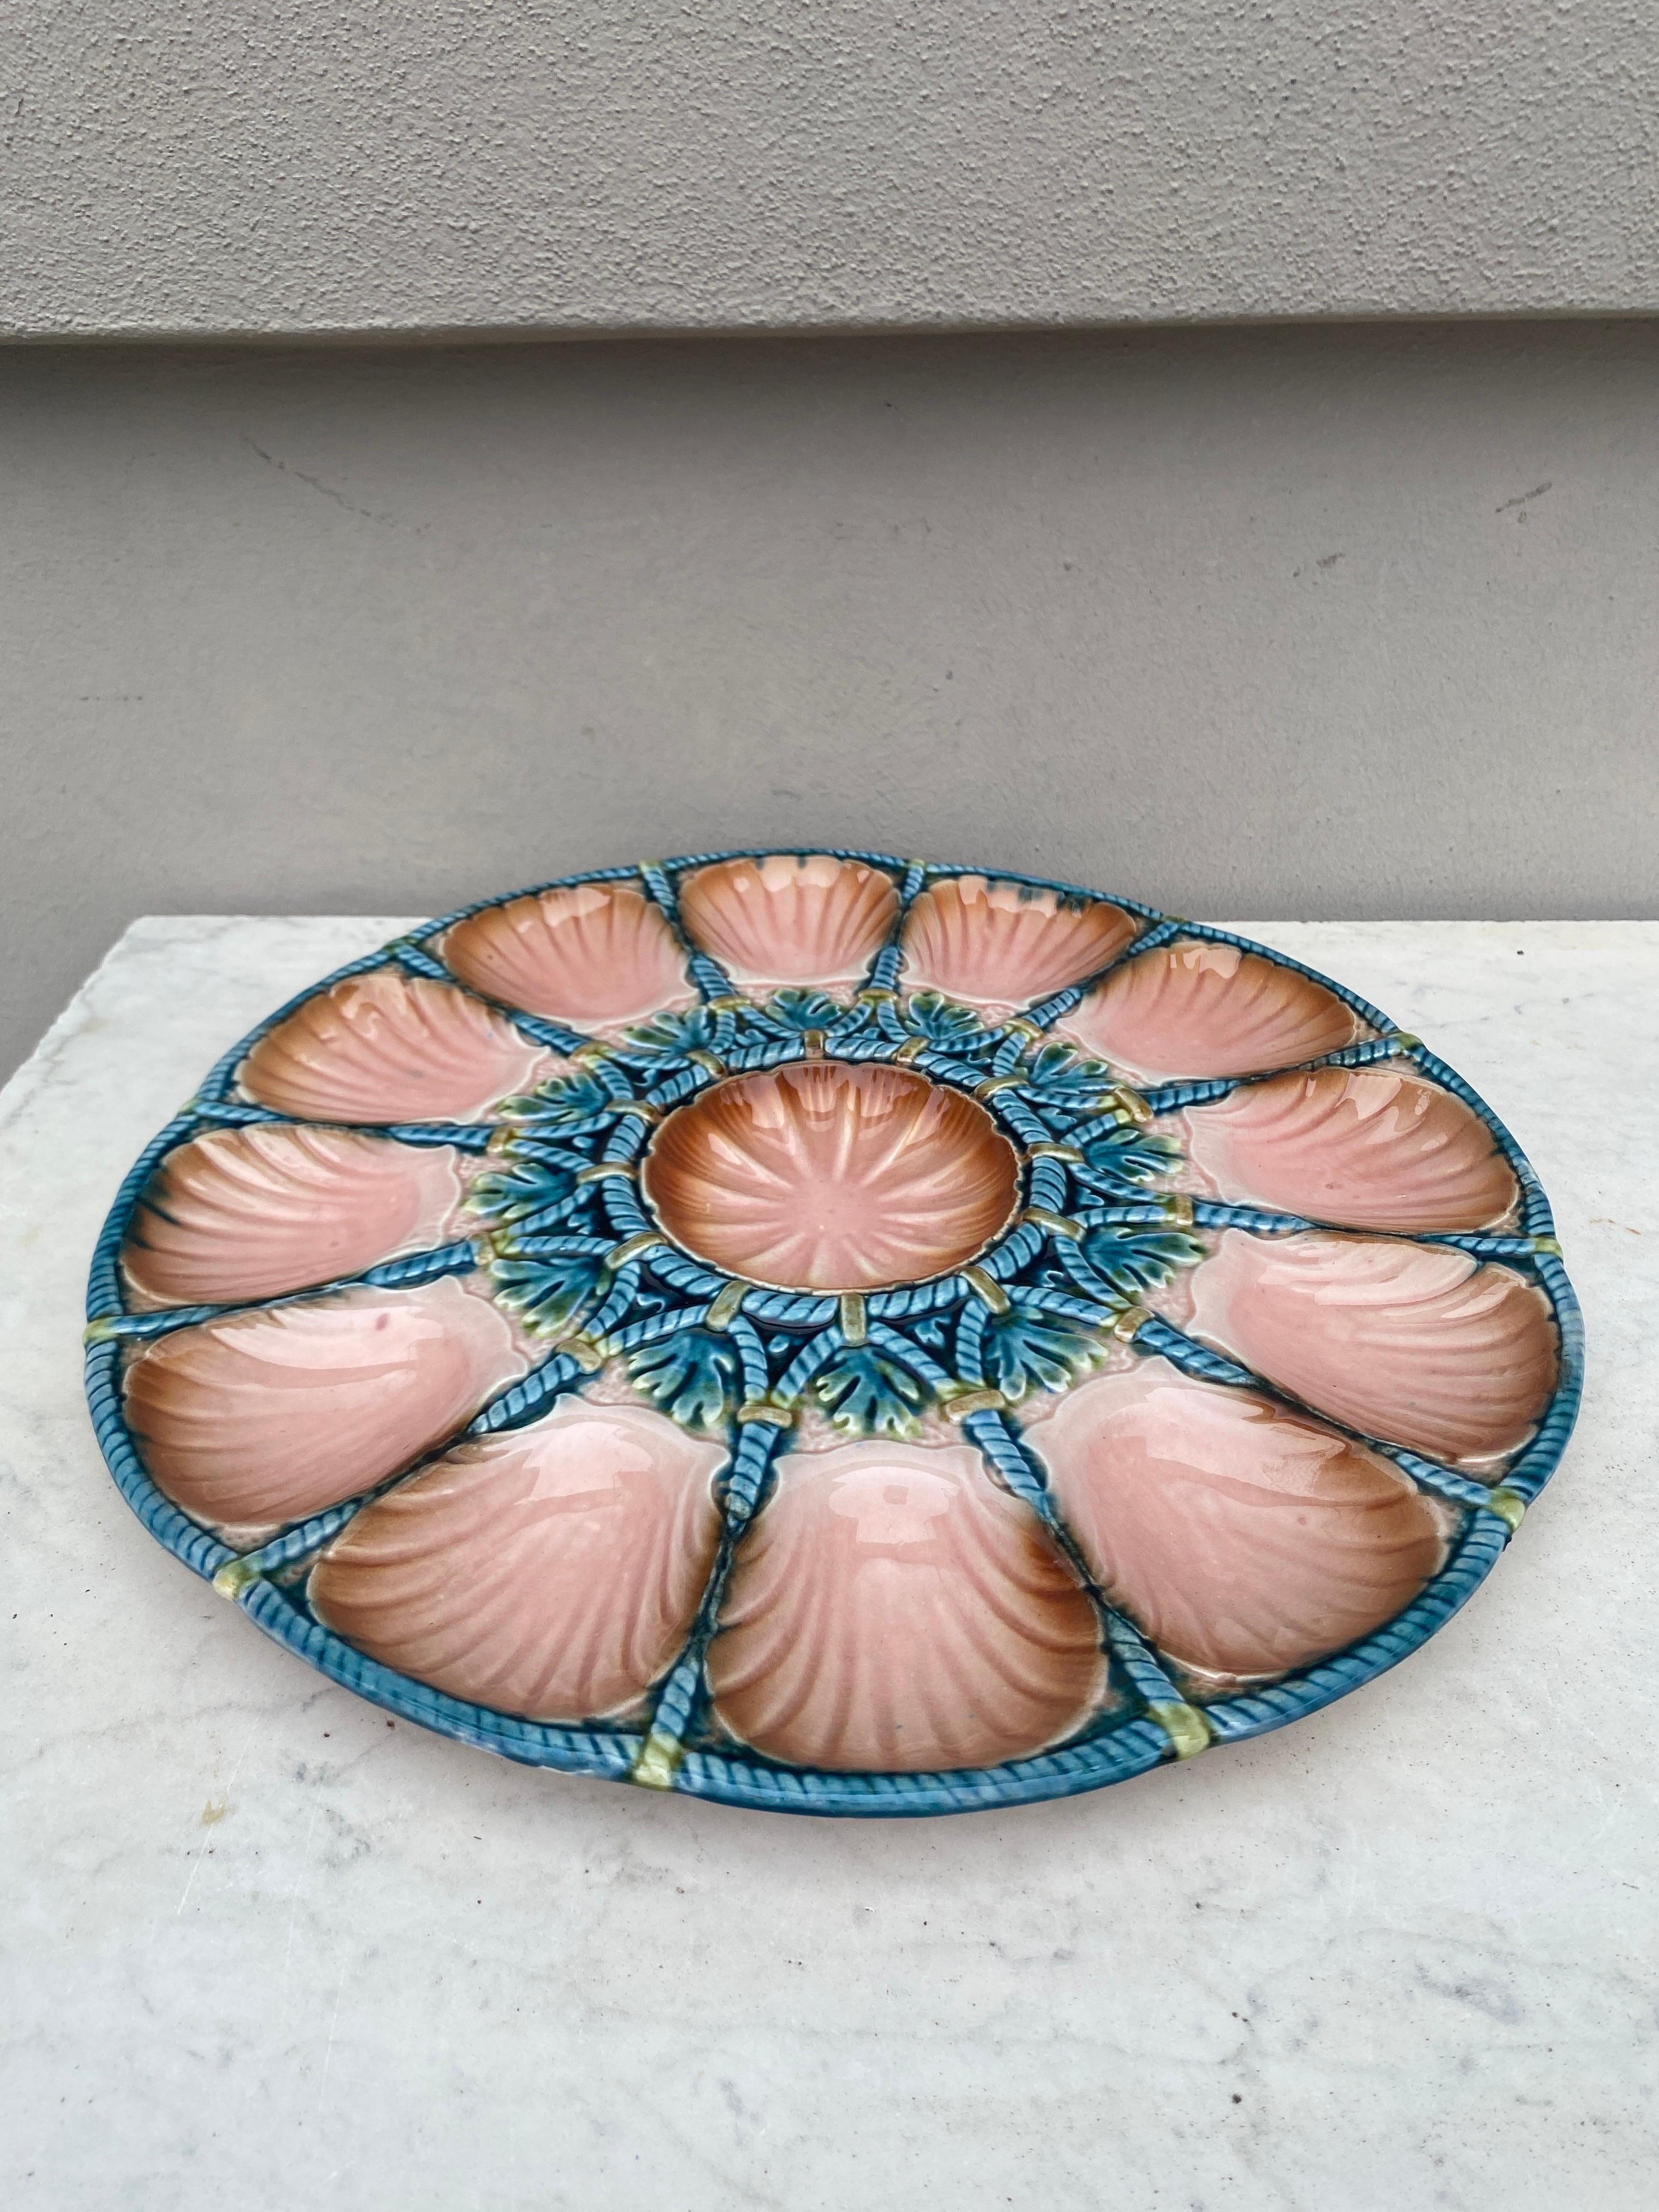 Large French Majolica oyster platter signed Sarreguemines circa 1920.
Diameter / 14.5